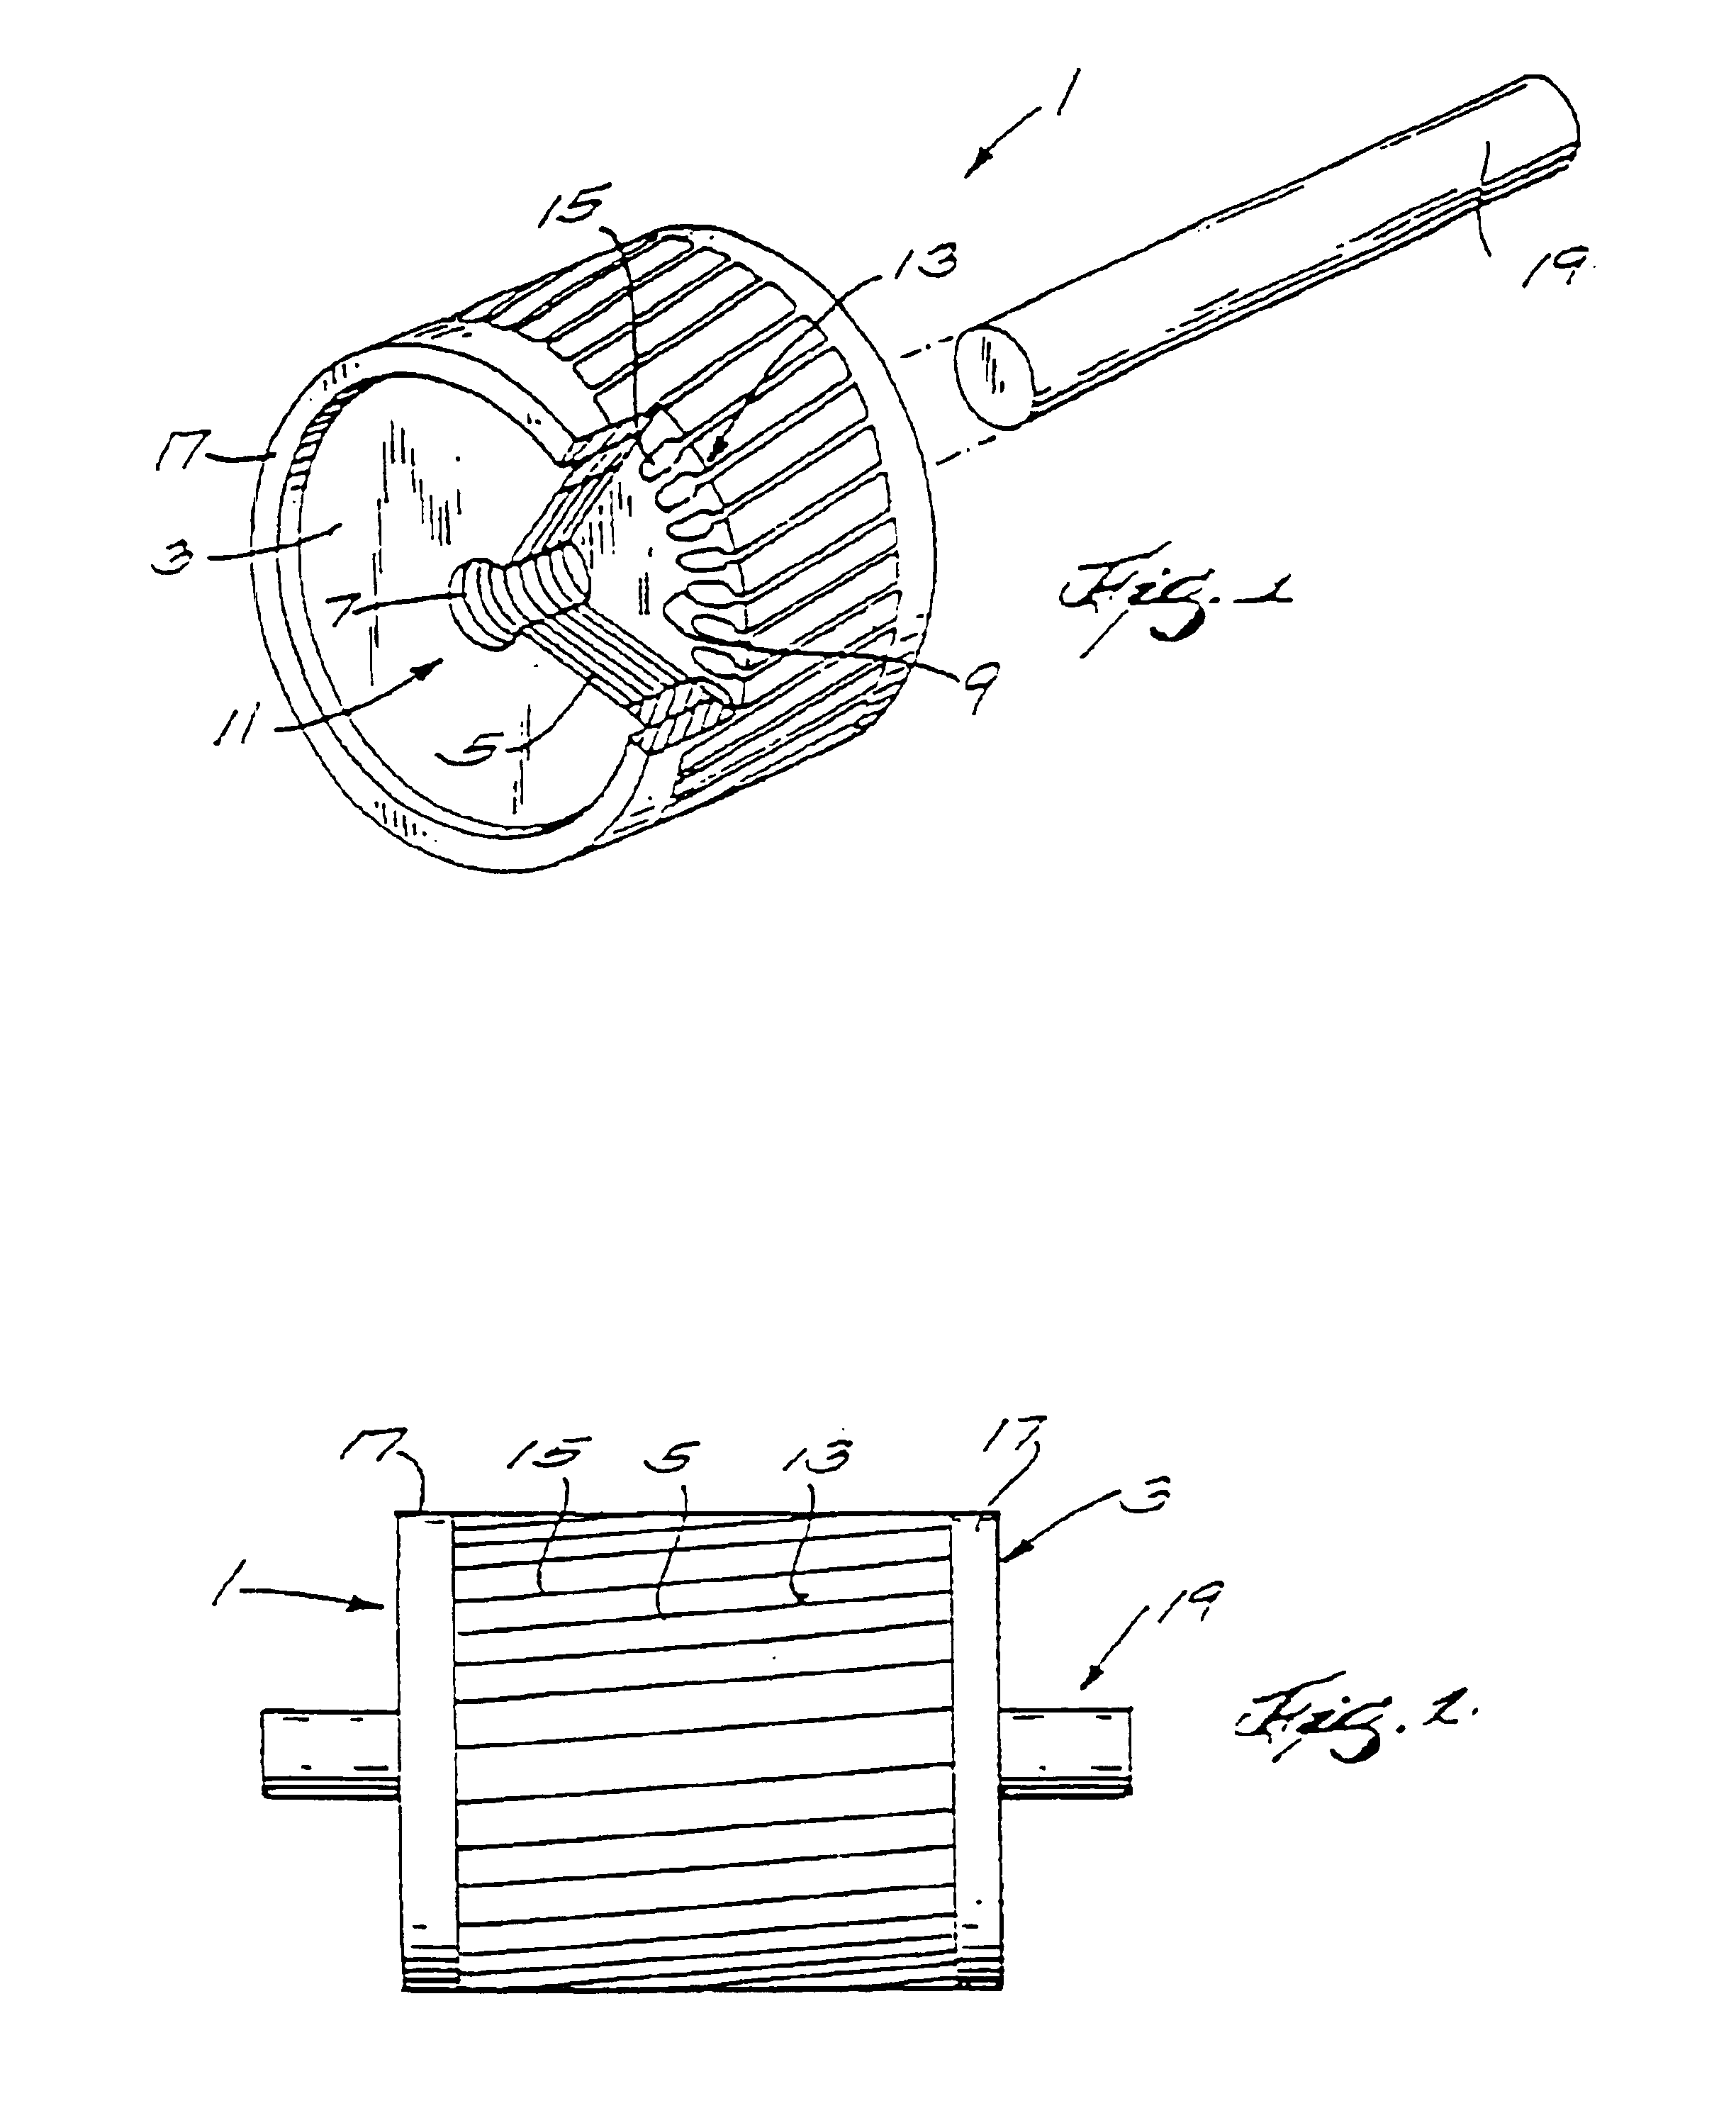 Coating compositions for electronic components and other metal surfaces, and methods for making and using the compositions